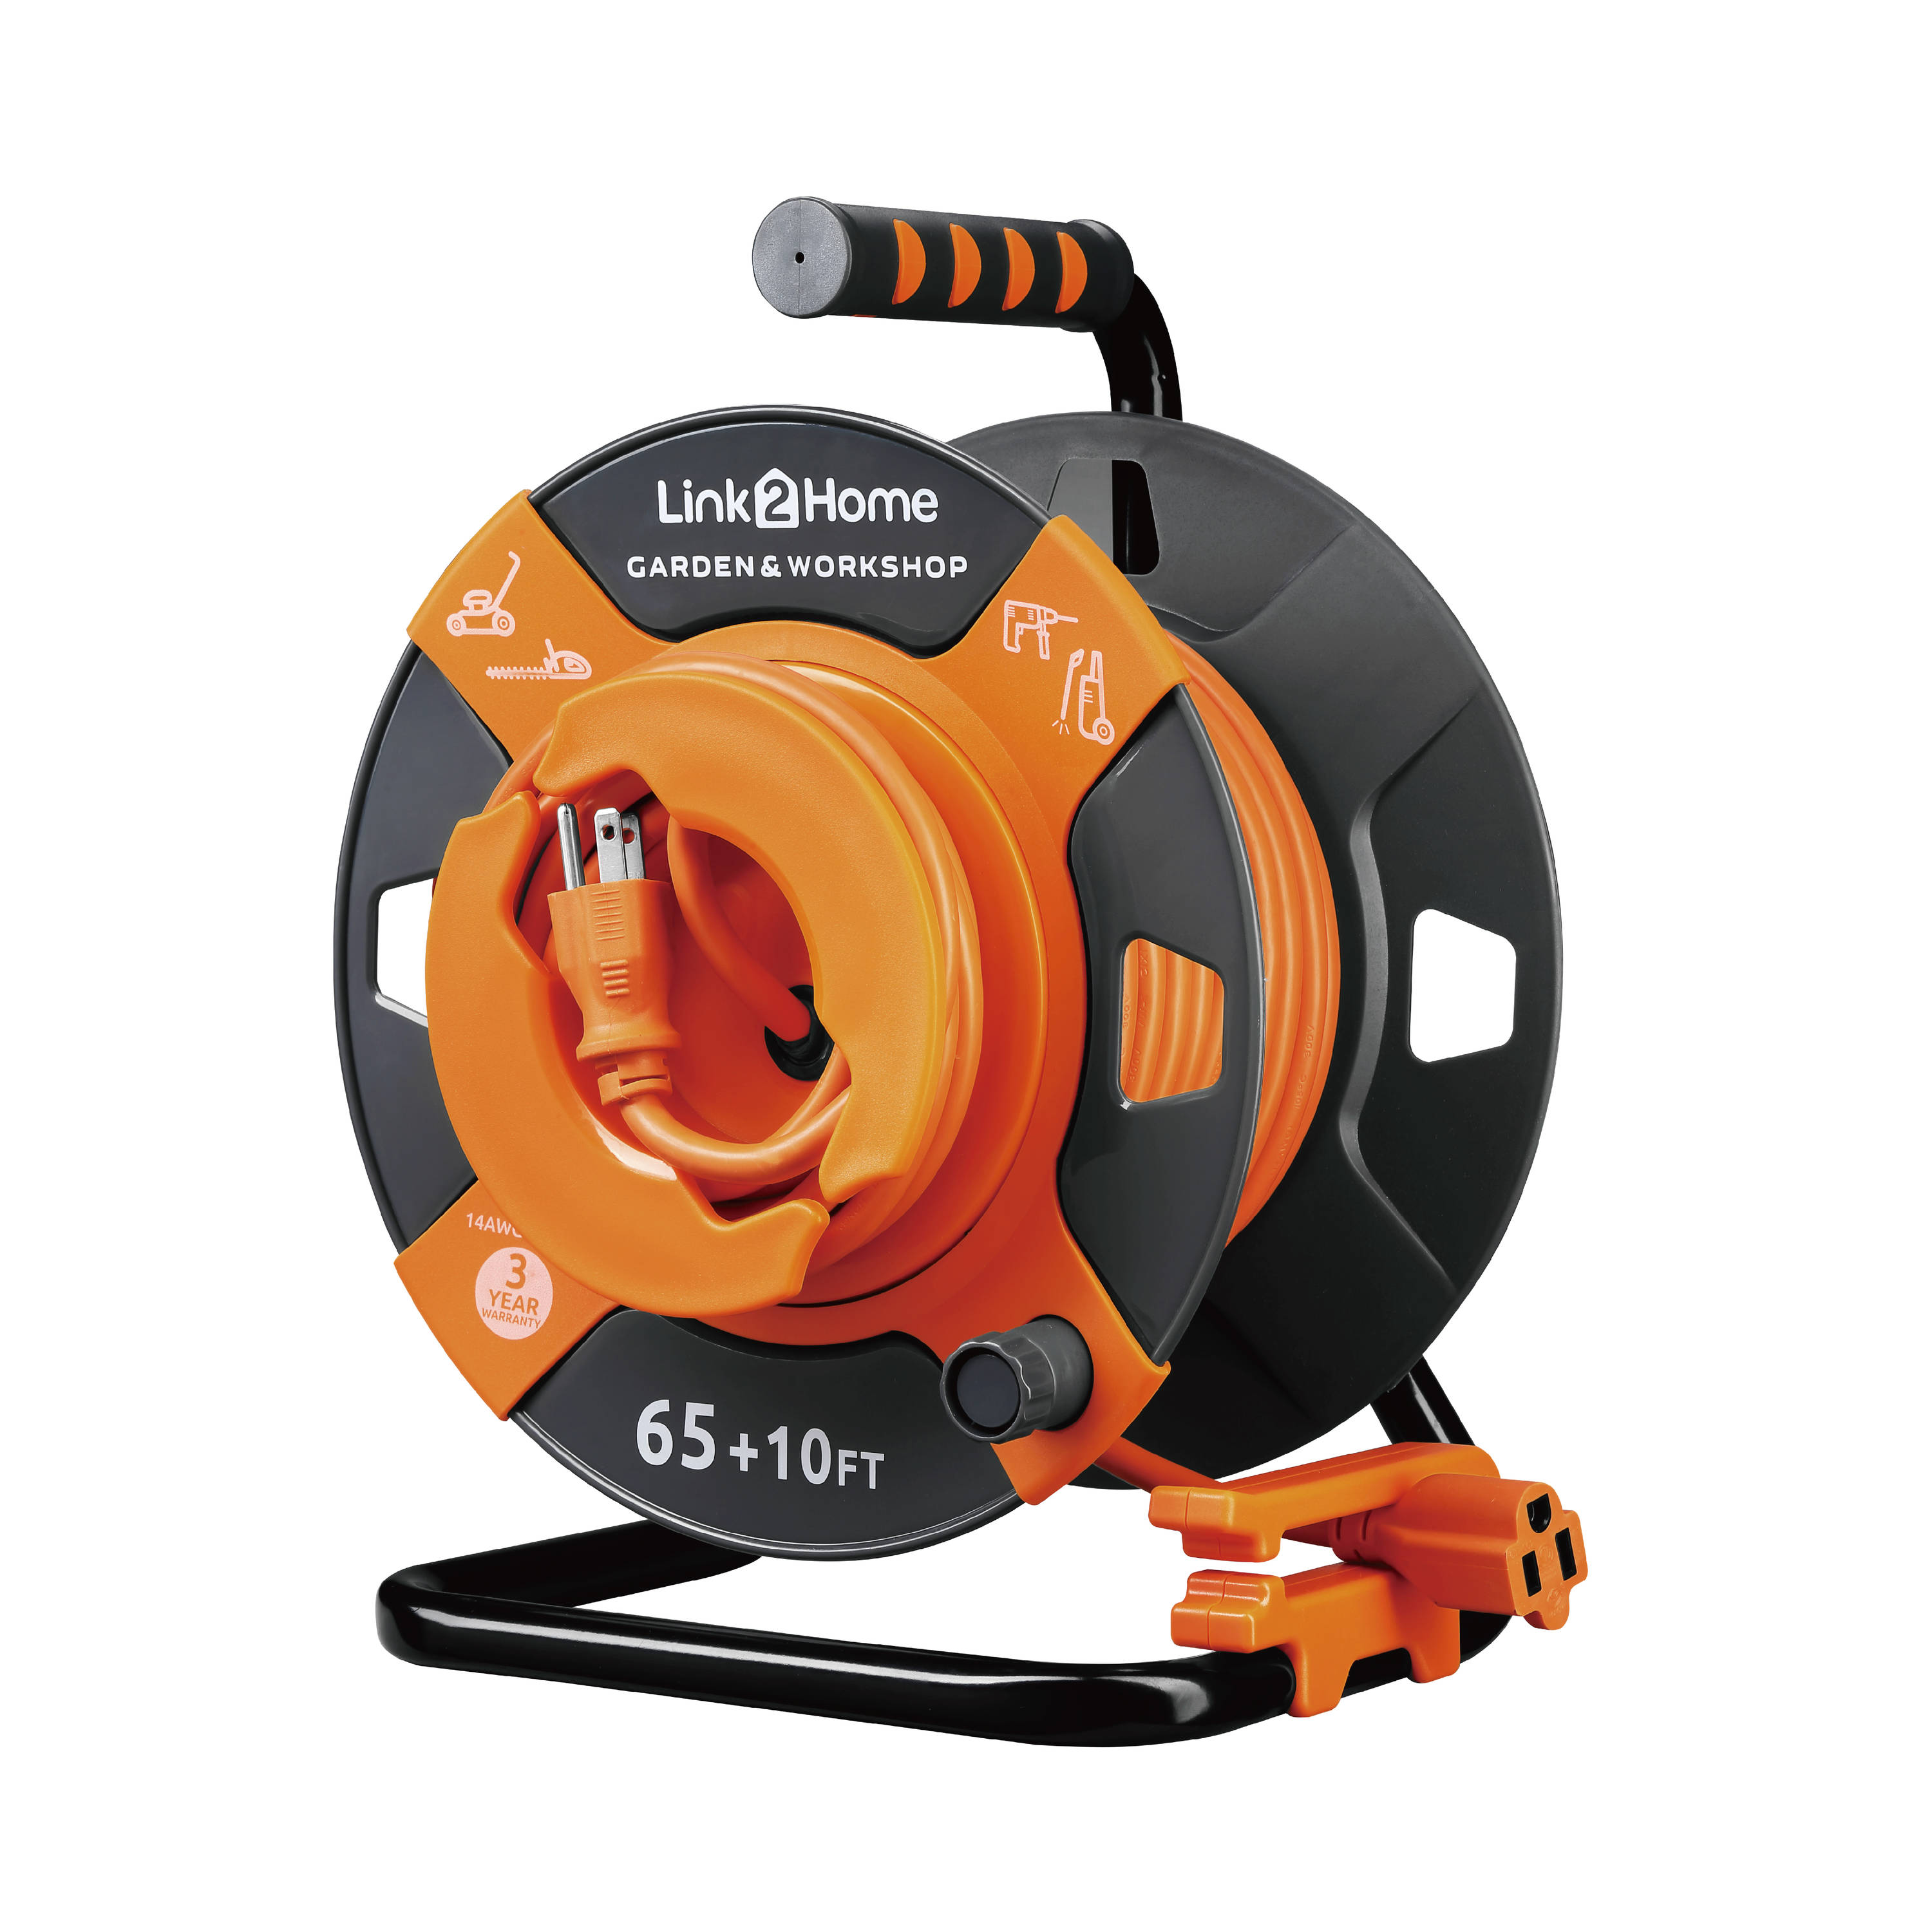 Link2Home Power Reel 80' Extension Cord with 4 Power Outlets